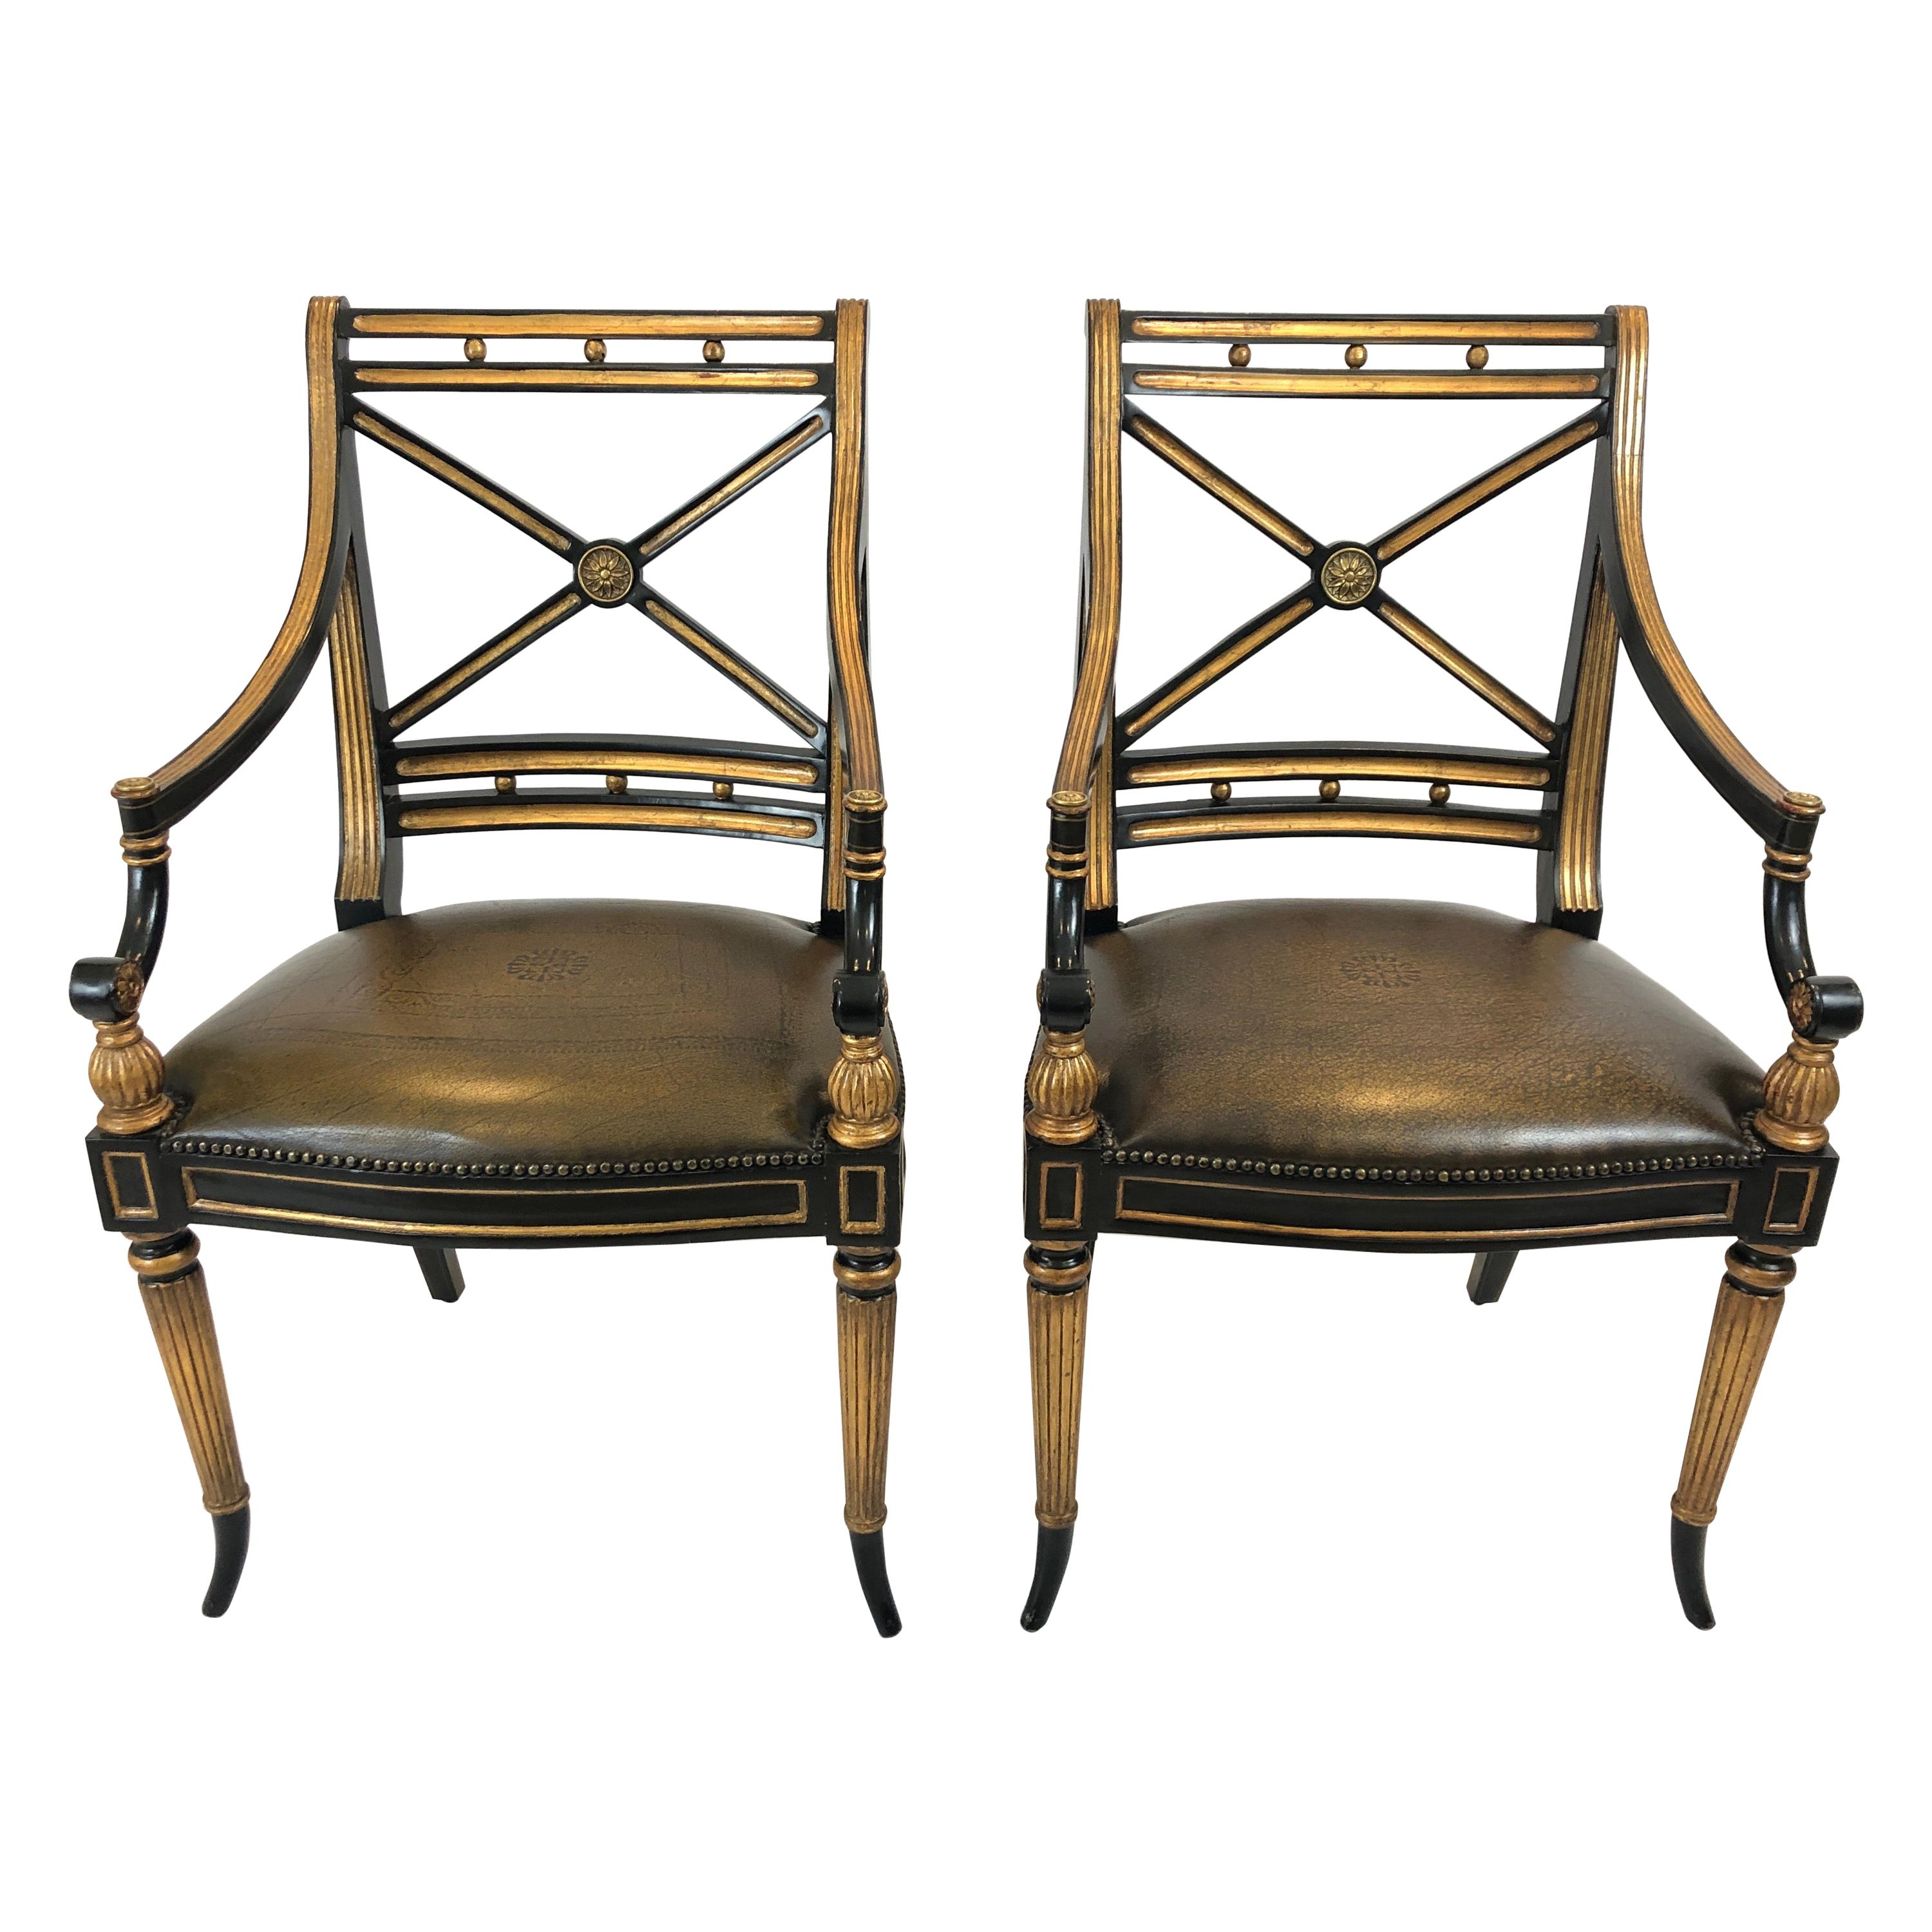 Glamorous Pair of Regency Theodore Alexander Armchairs with Leather Seats